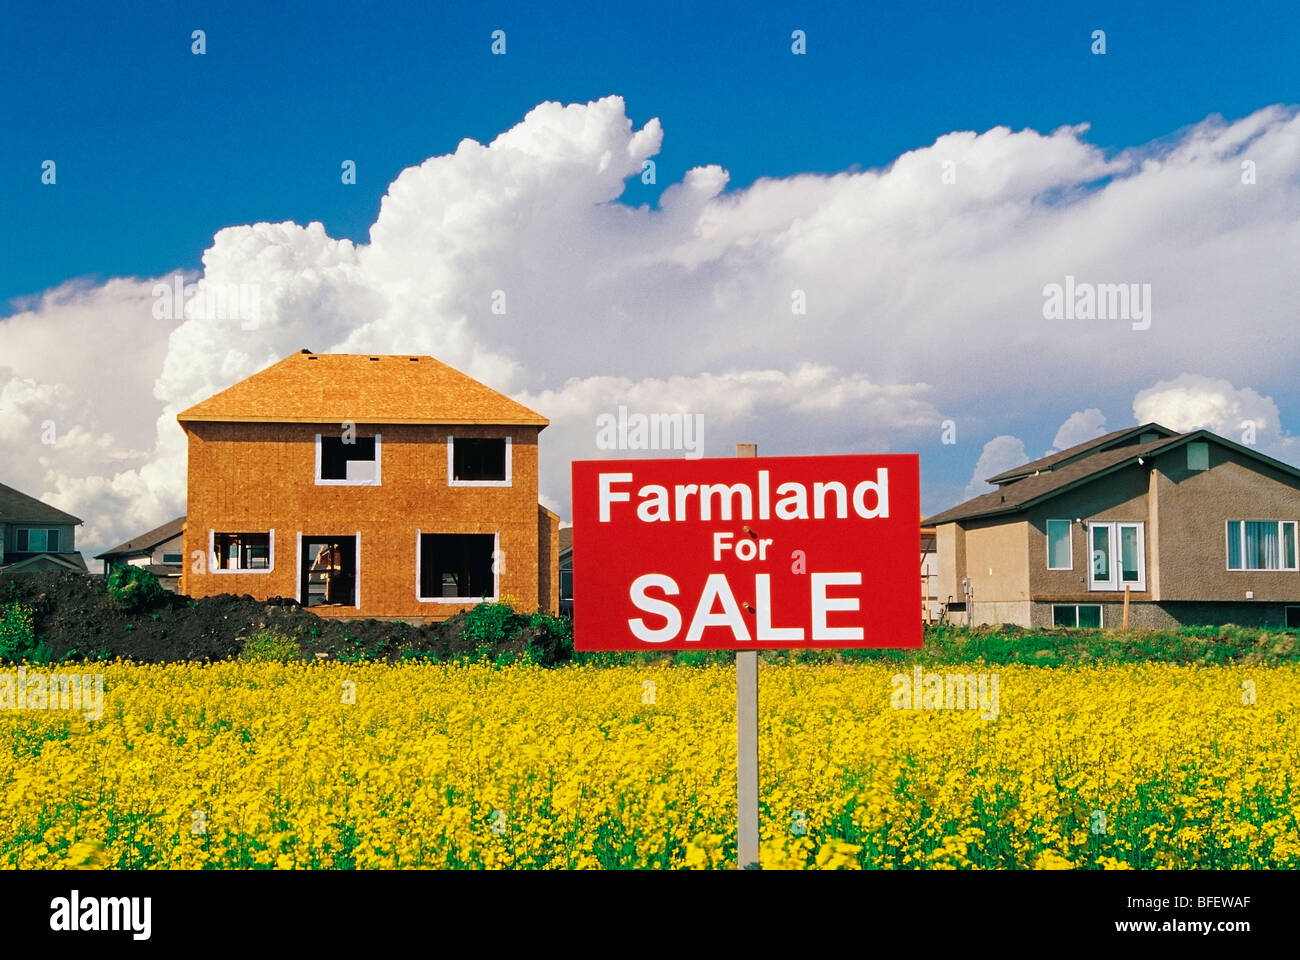 Farmland for sale sign in a blooming canola field with housing development in the background, Winnipeg, Manitoba, Canada Stock Photo